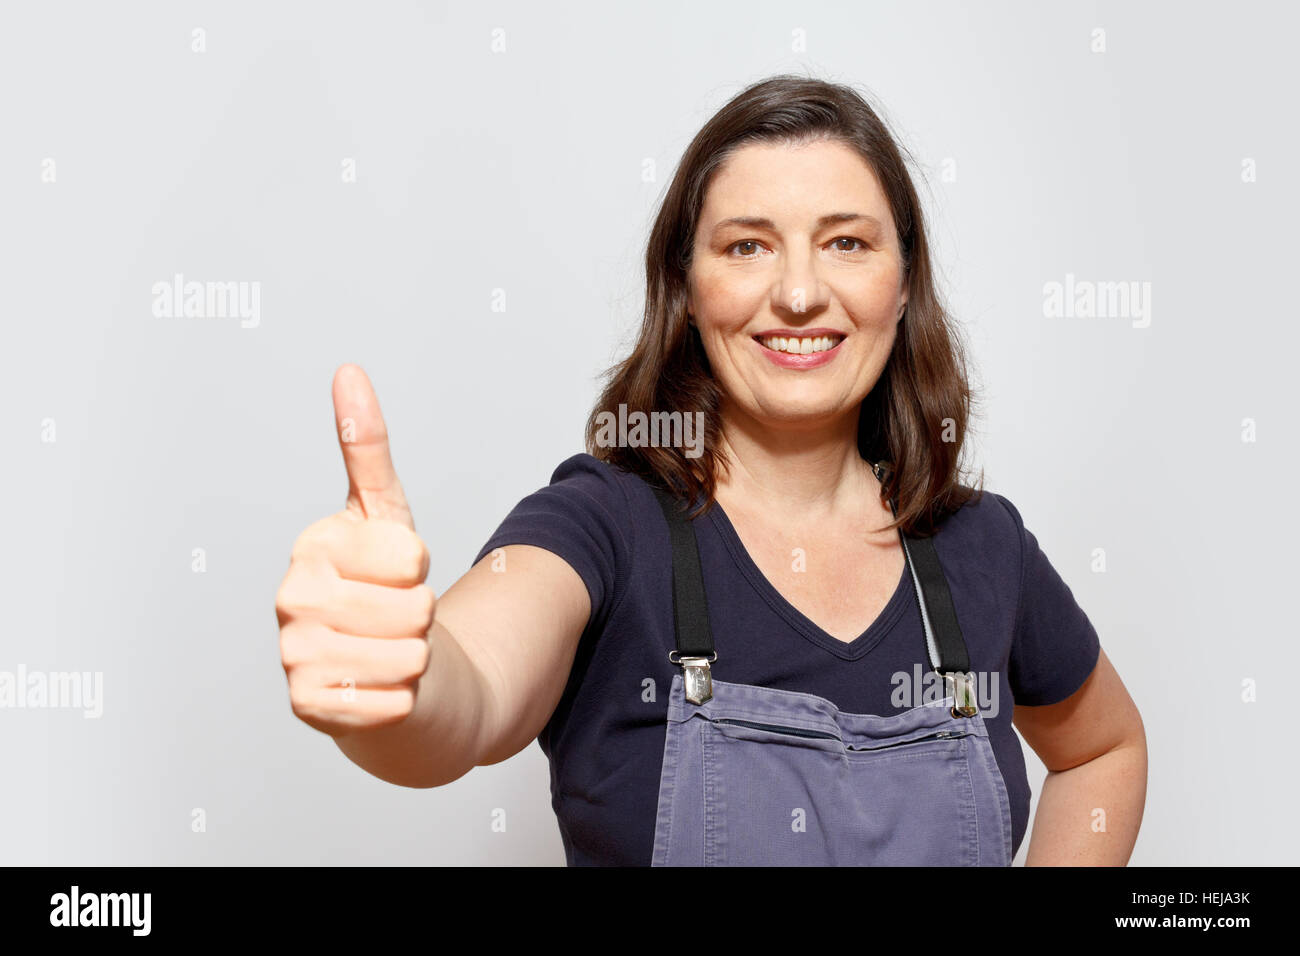 Smiling adult woman wearing dungarees showing the thumbs up sign, light grey or gray background, copy or text space Stock Photo